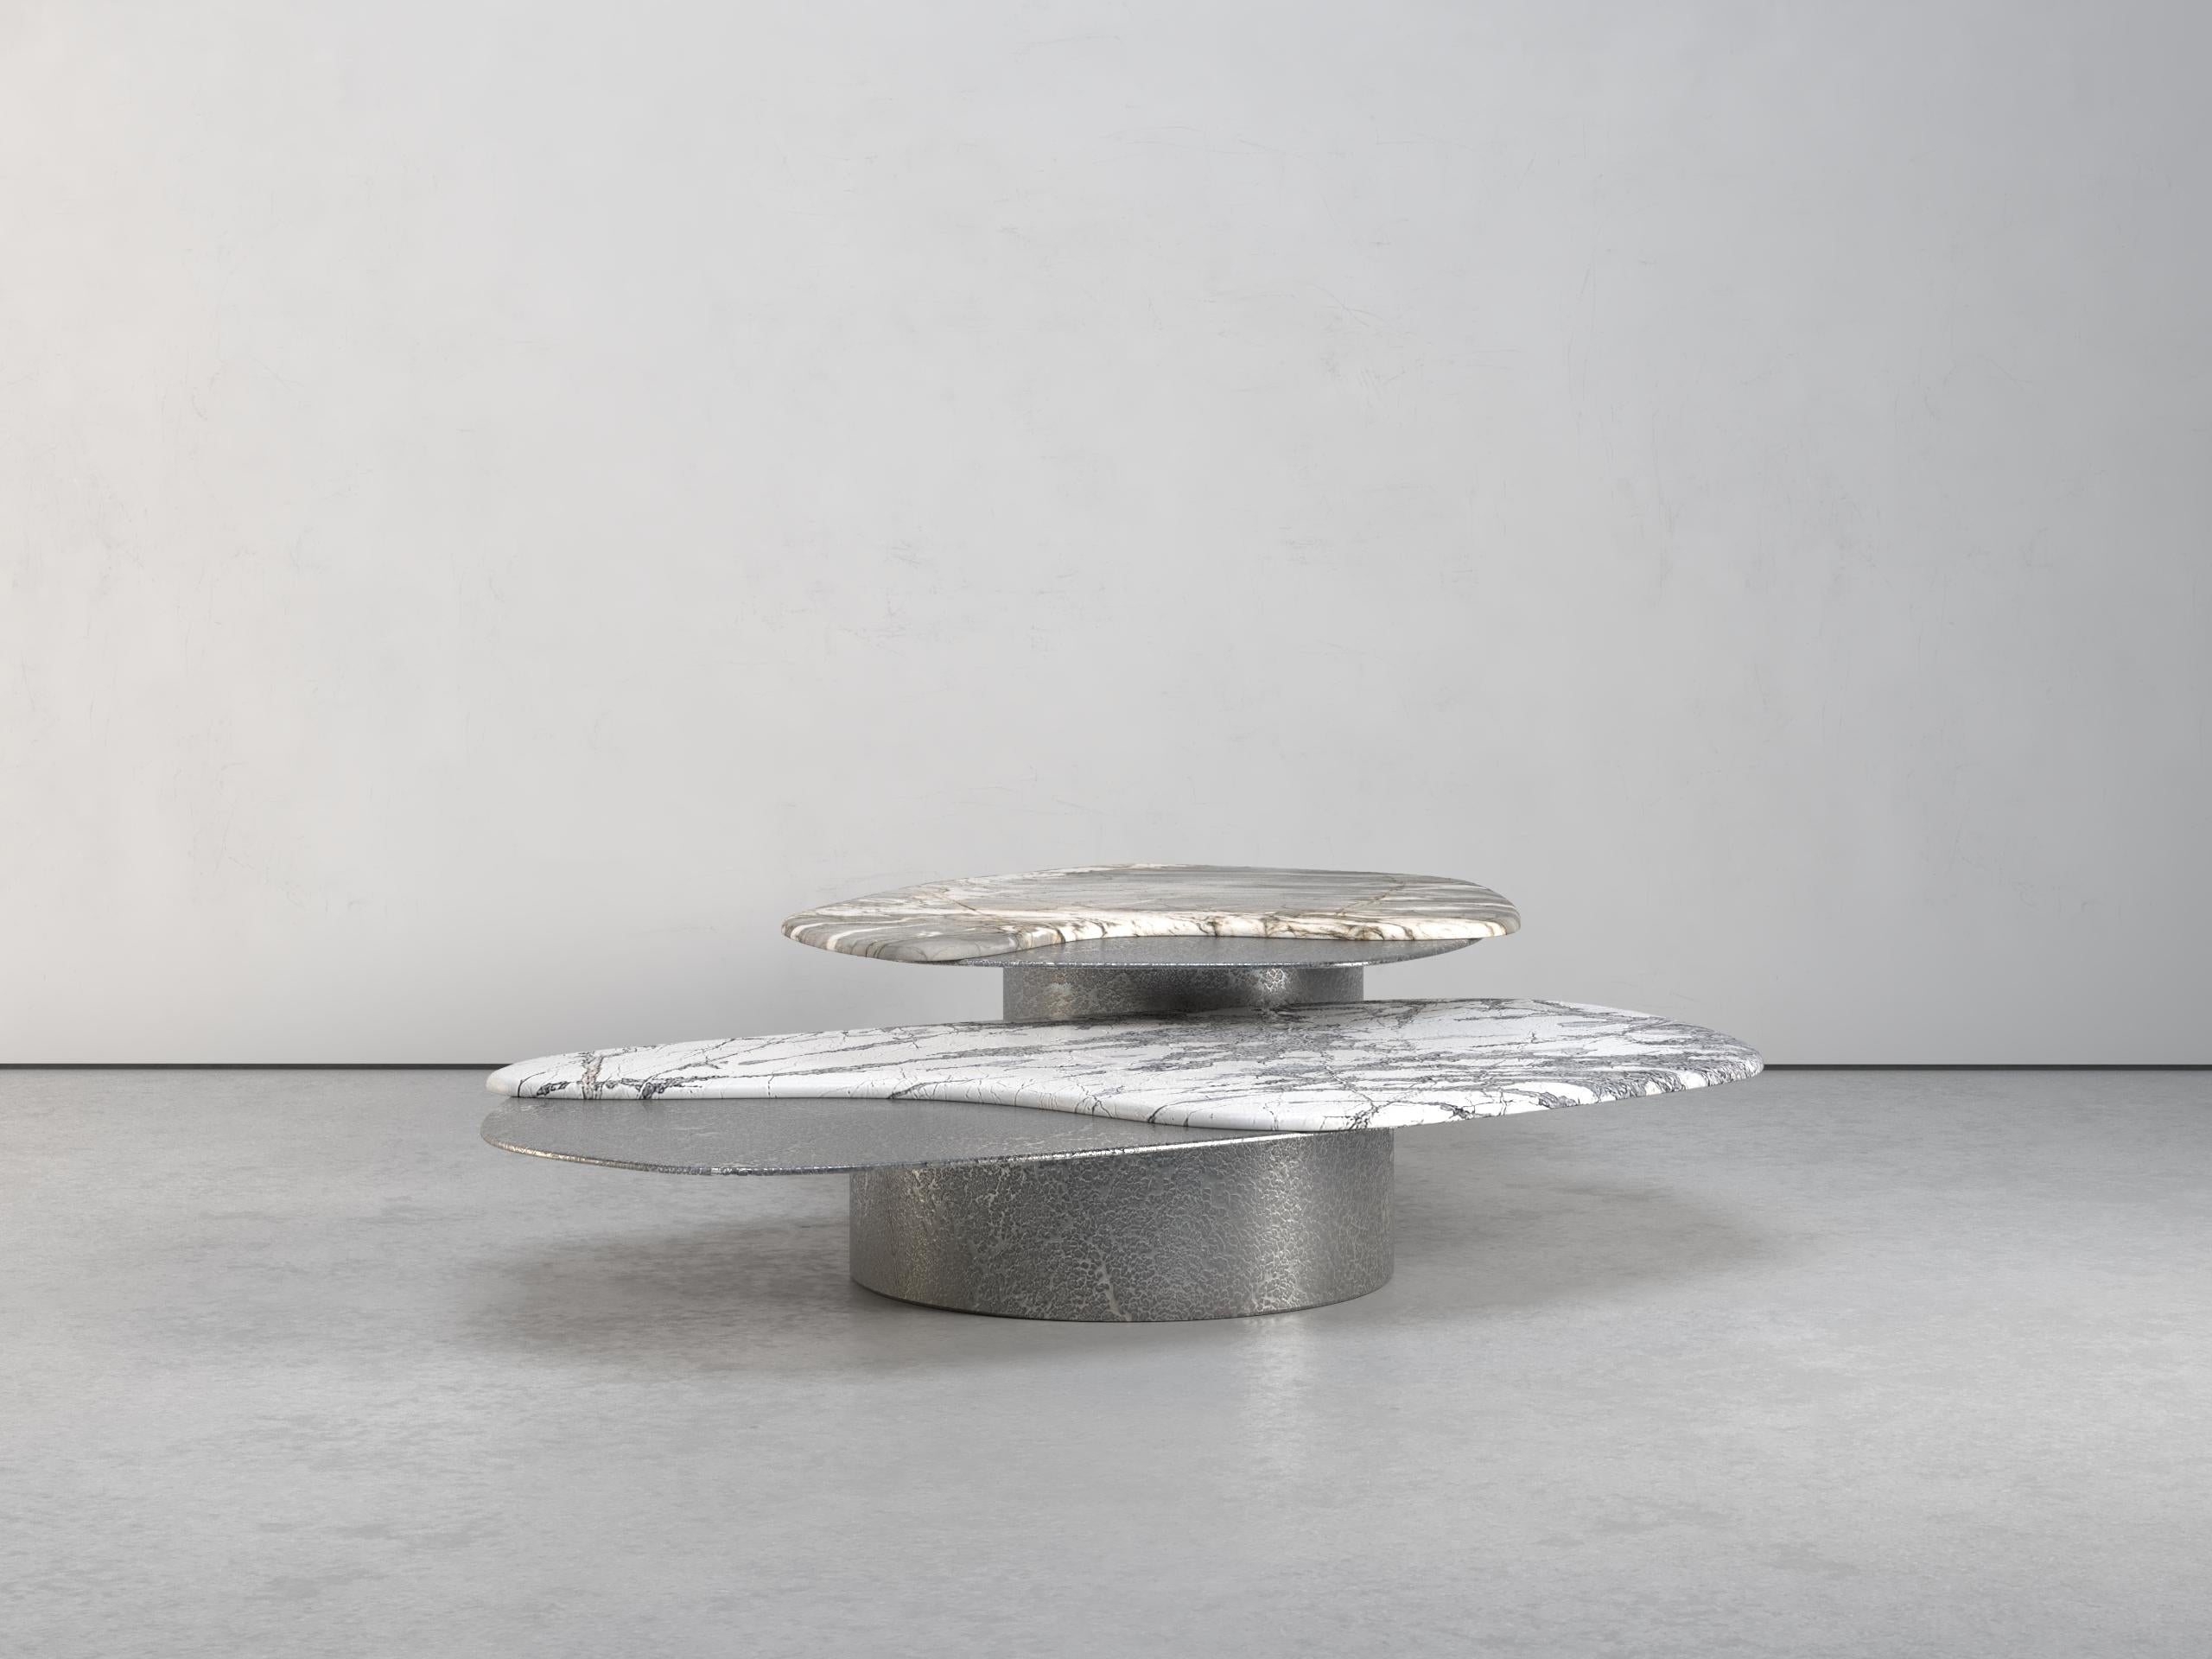 The Epicure IV coffee table set, 1 of 1 by Grzegorz Majka
Edition 1 of 1
Dimensions: 63 x 63 x 13 in
Materials: aluminium, quartz and brass

“No man is an island entire of itself; every man is a piece of the continent, a part of the main.” The